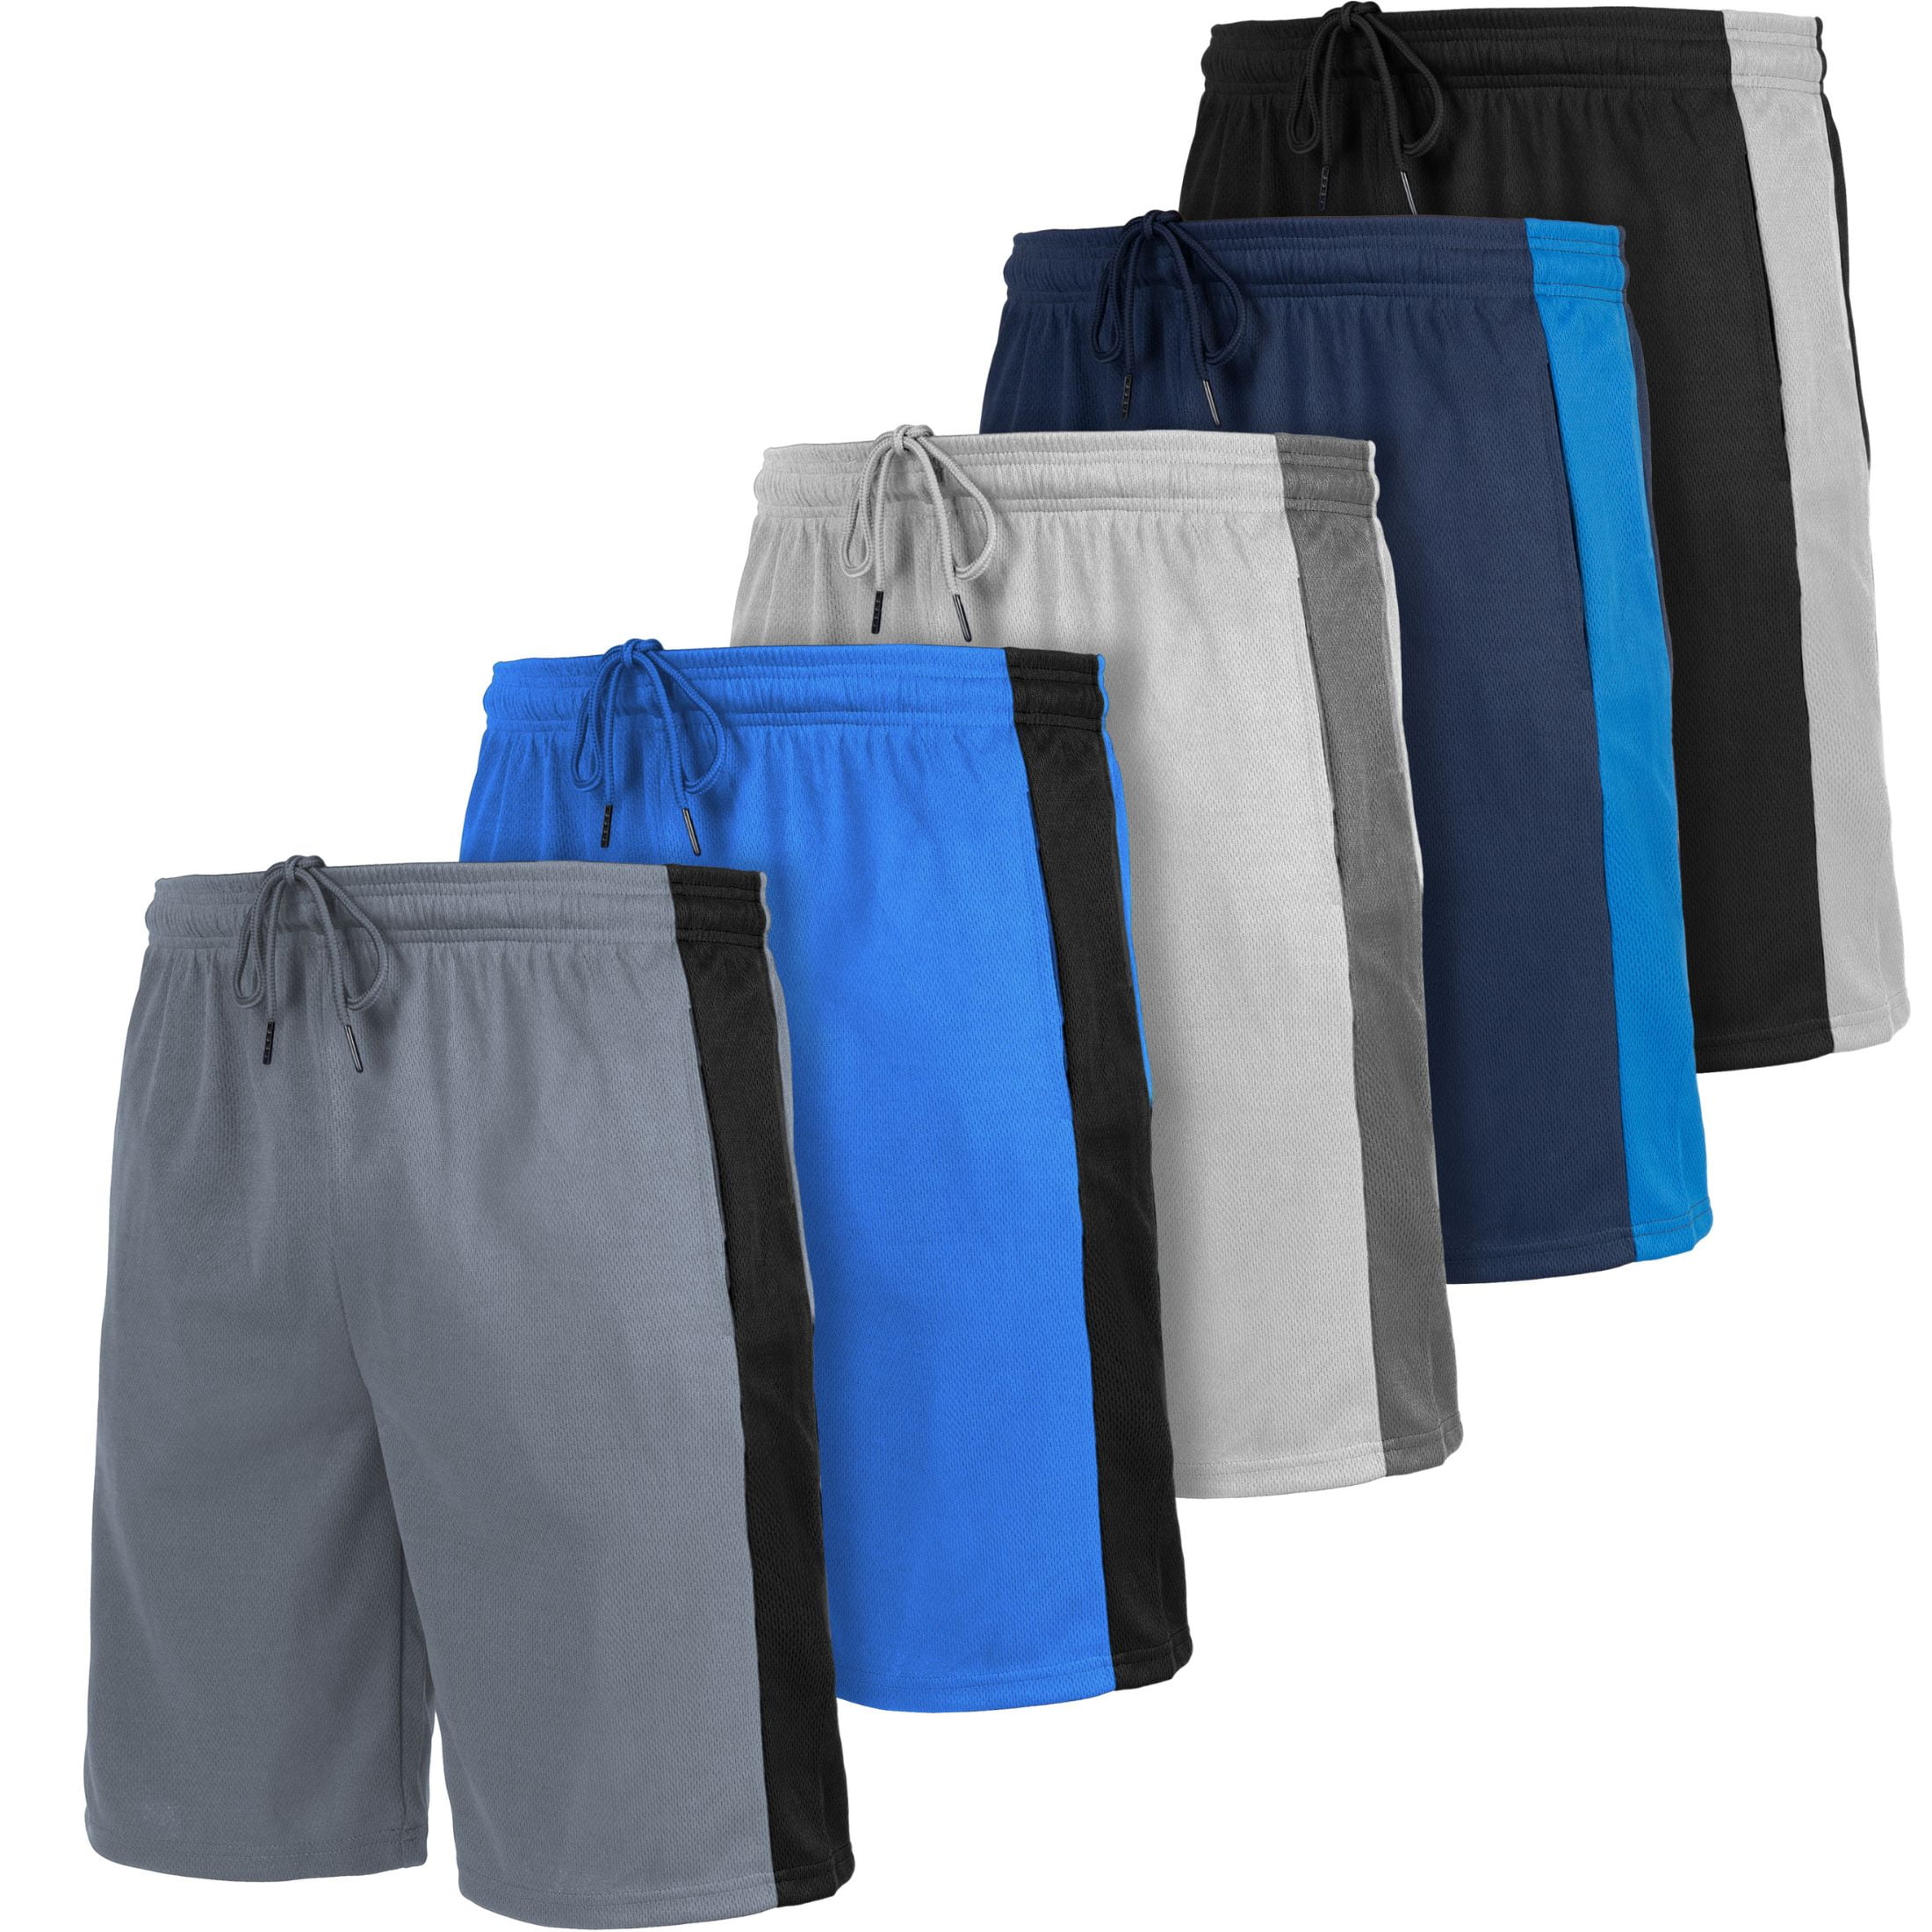 [5 Pack] Men?s Dry-Fit Active Athletic Performance Shorts - Basketball  Running Gym Workout Fitness Sports with Two Side Pockets